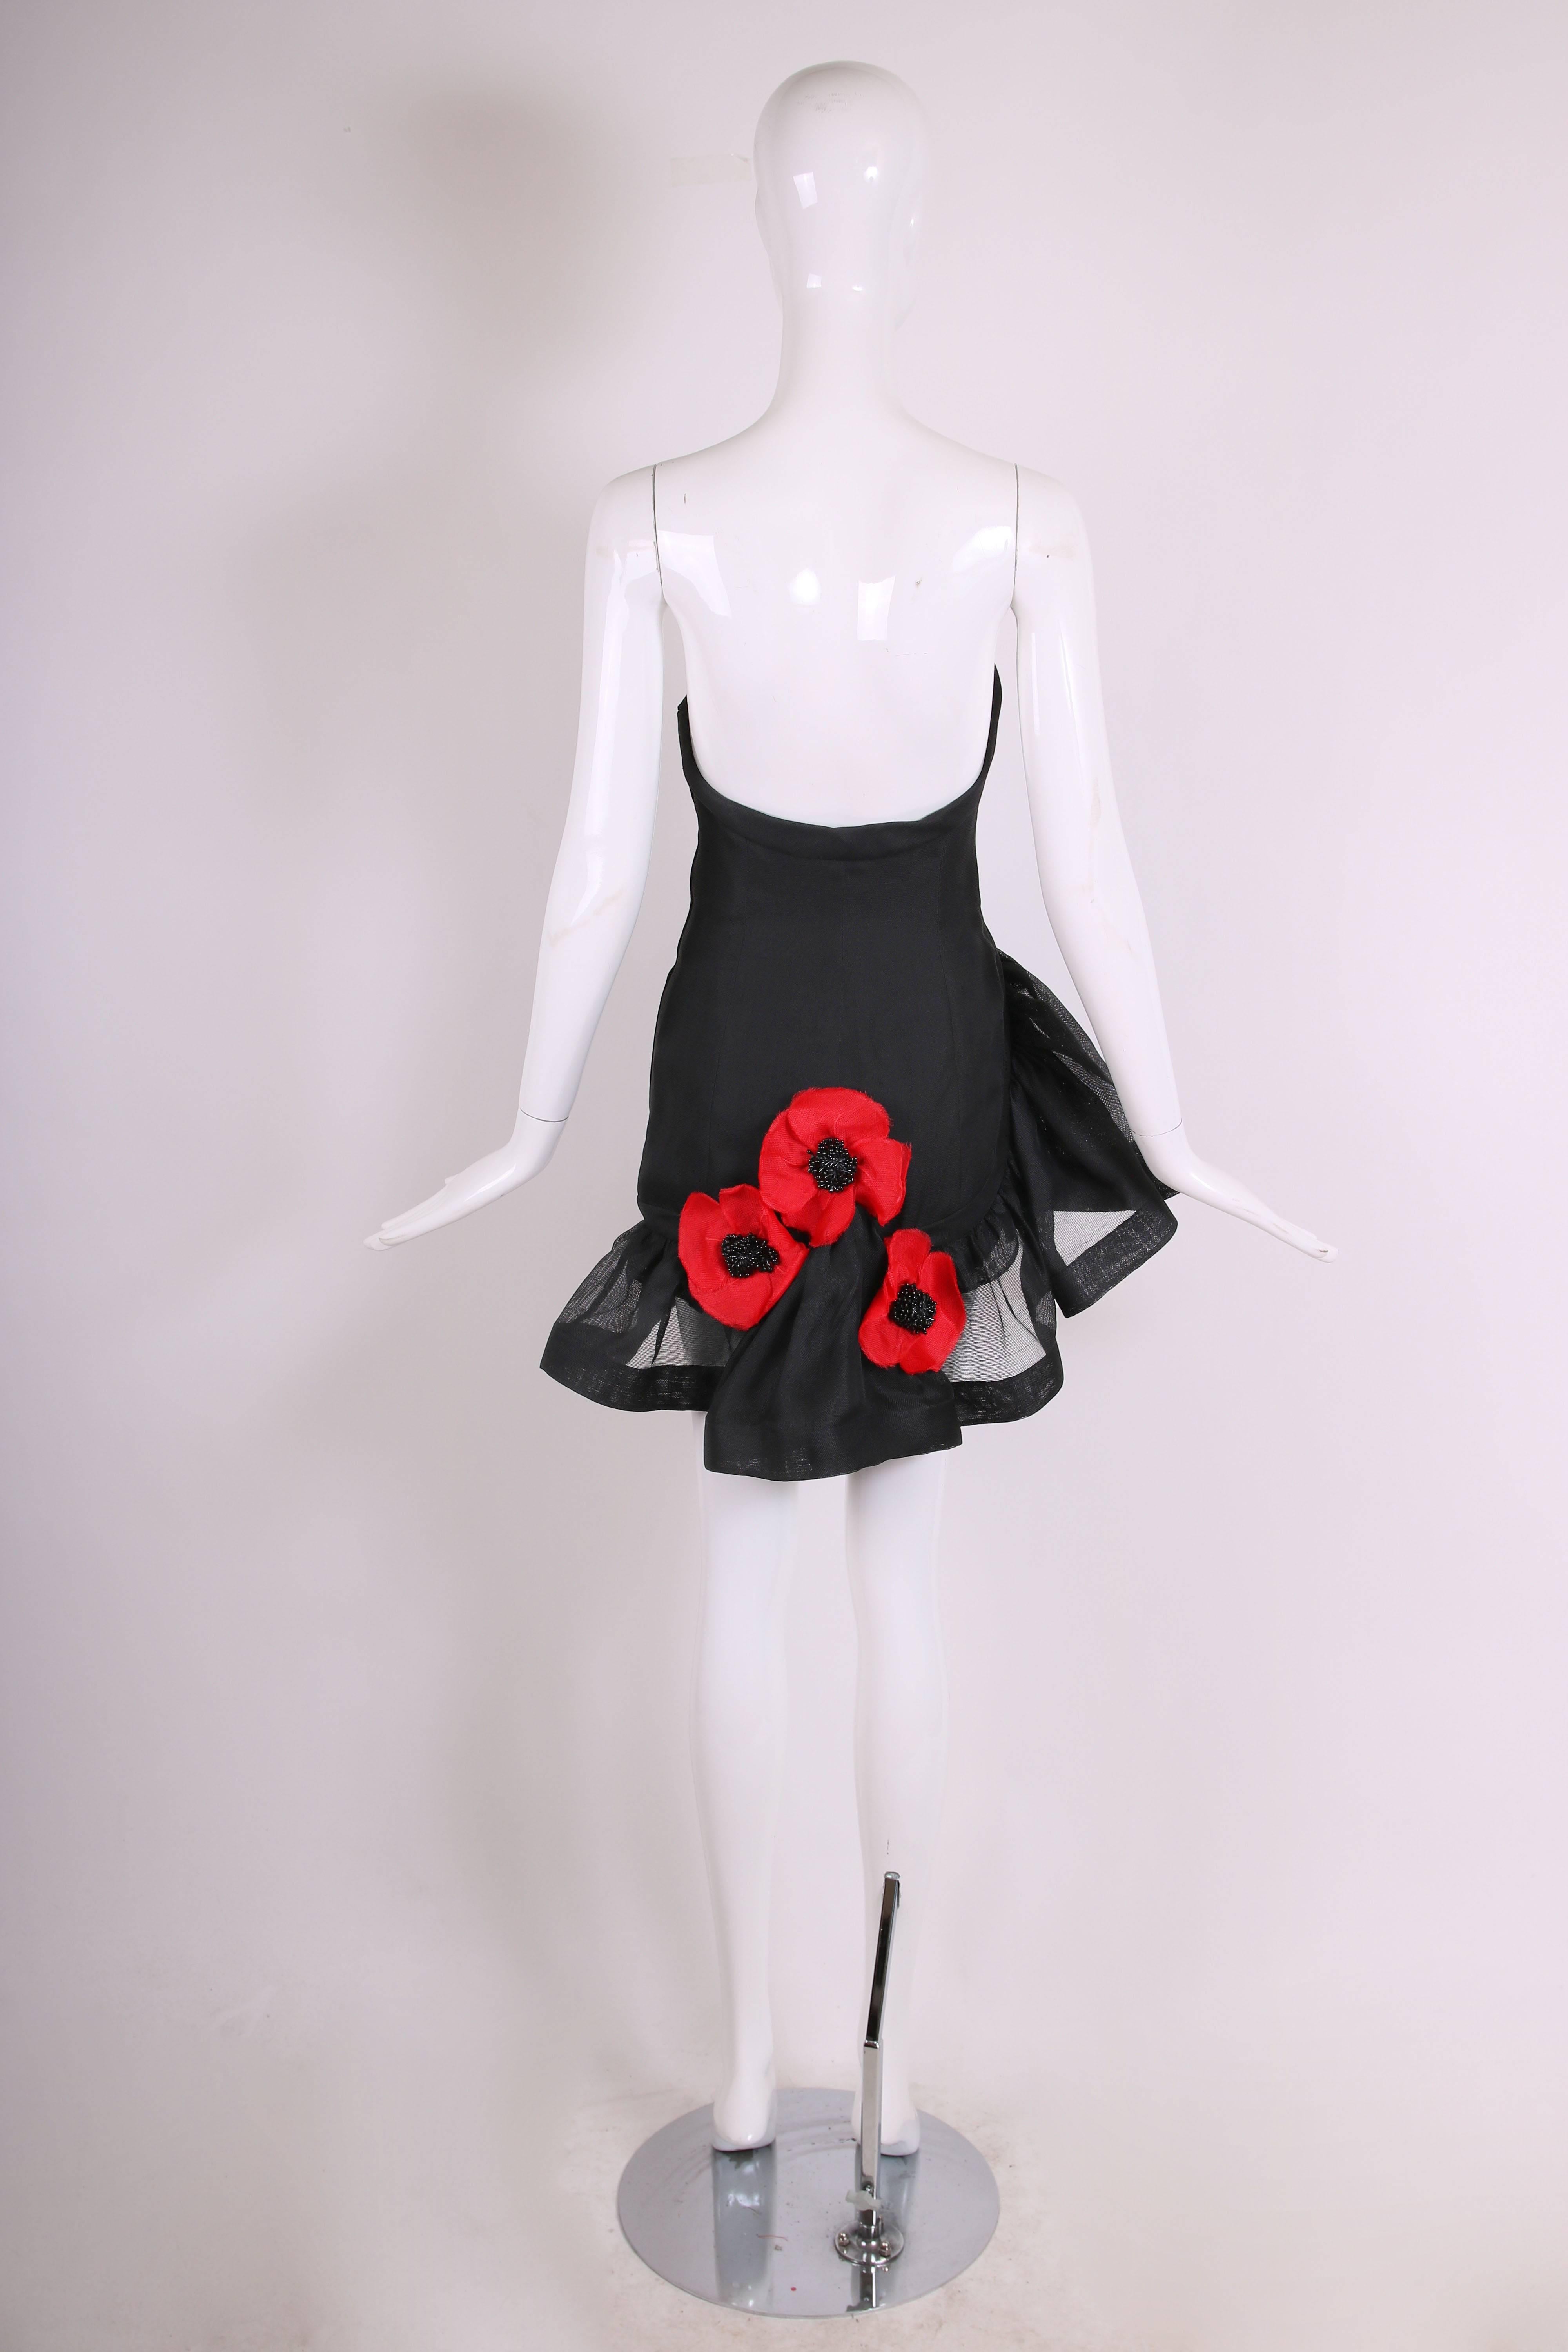 1990's Yves Saint Lauren YSL black gazar mini cocktail dress w/asymmetric strapless bust and asymmetric ruffled hem with oversized, red poppies at back. Interior boning at bust and silk lining. In excellent condition. Size 36
MEASUREMENTS:
Waist -